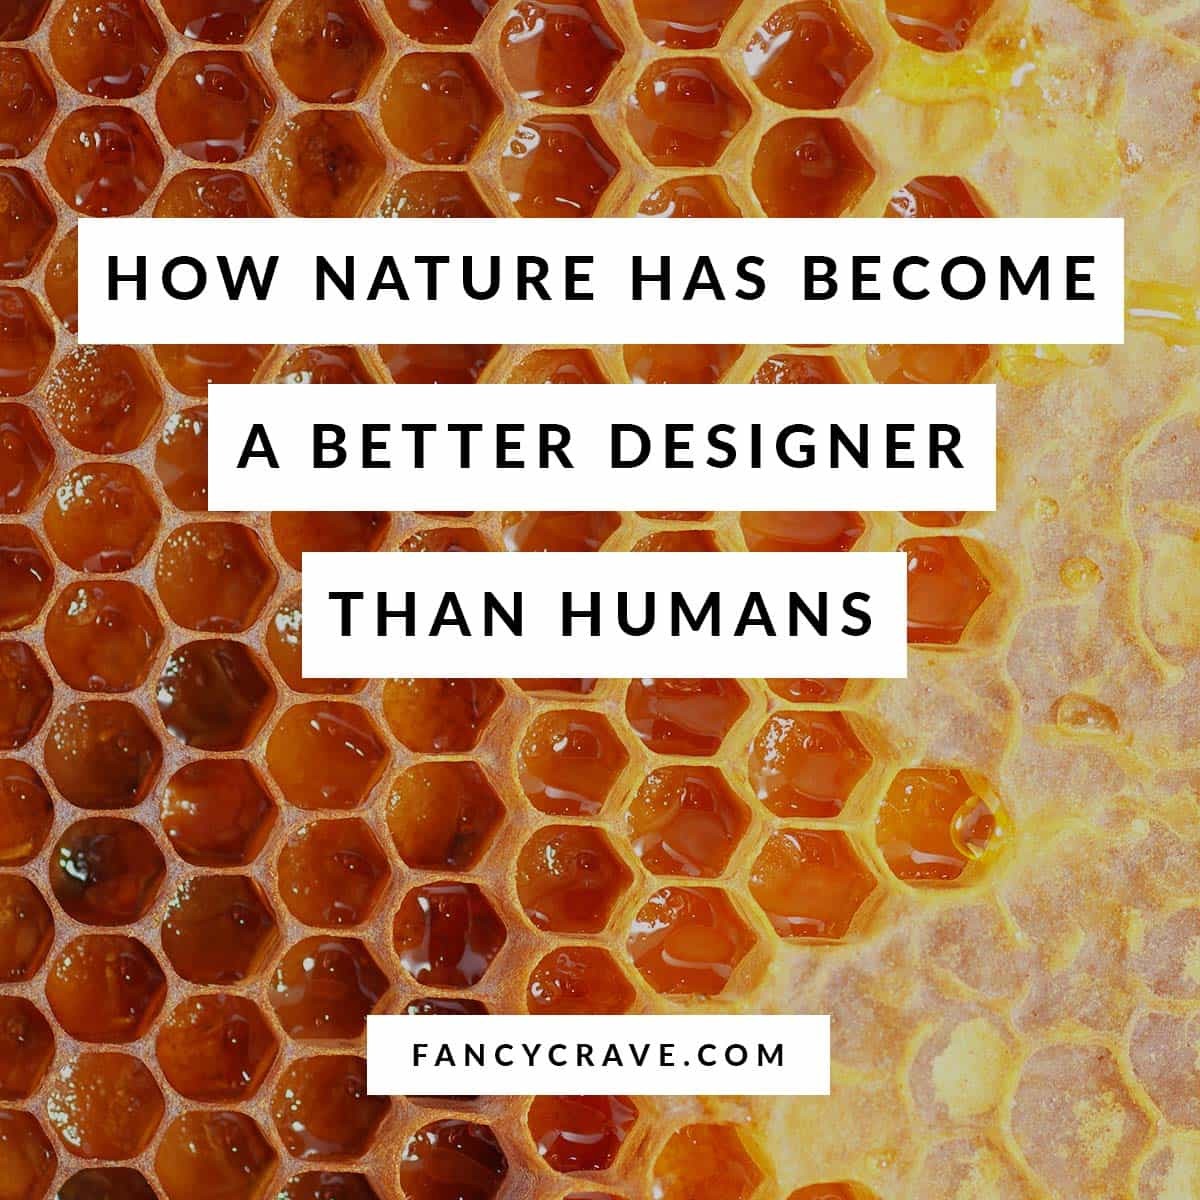 How Nature Has Become a Better Designer Than Humans